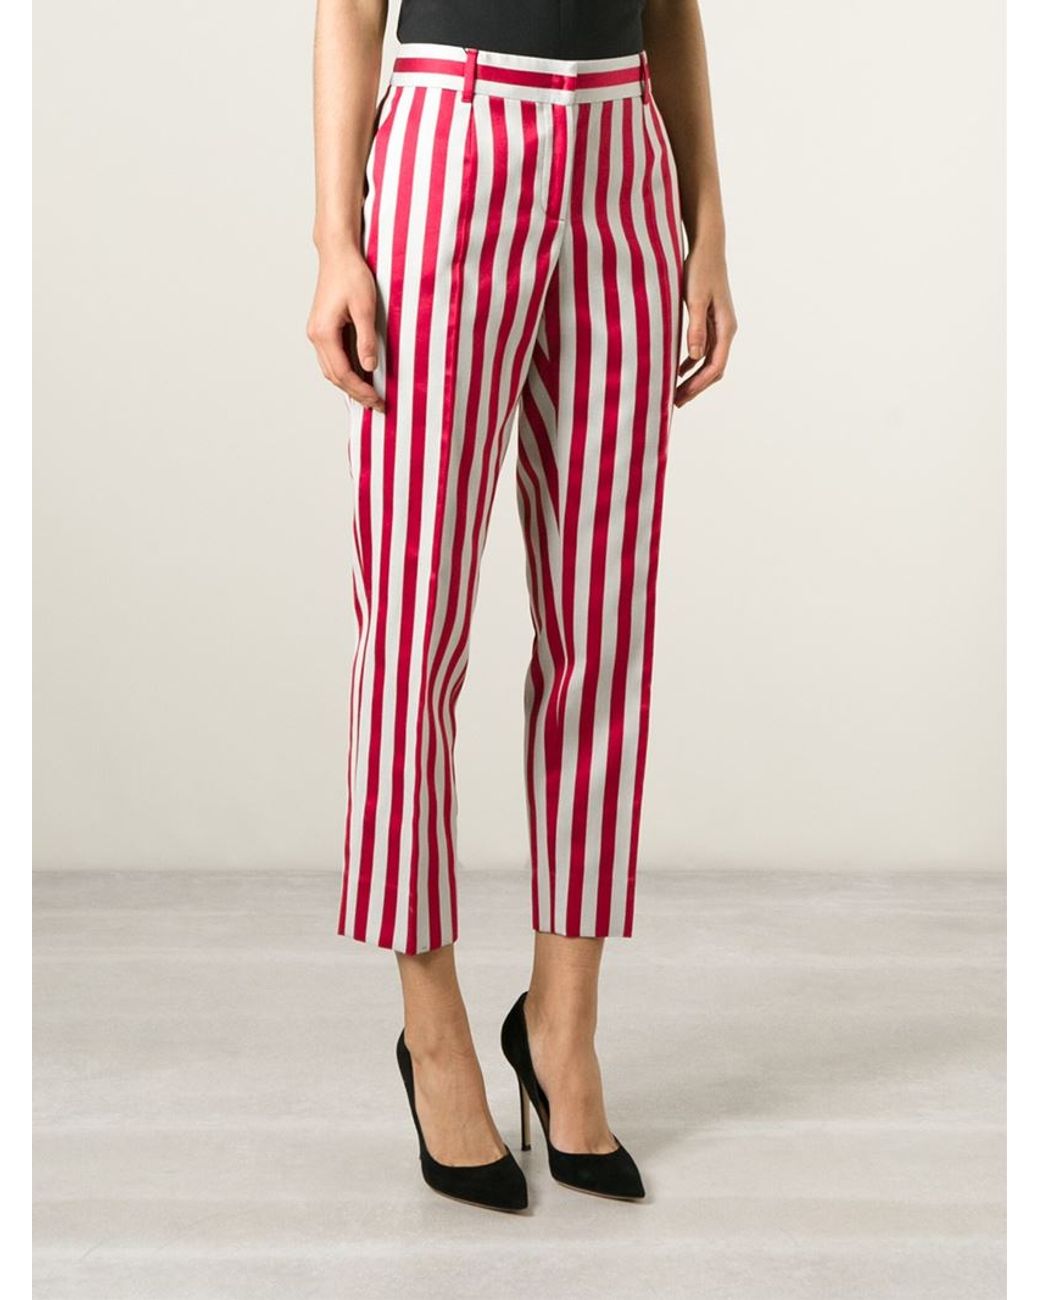 Men Vertical Striped Tapered Pants  SHEIN IN